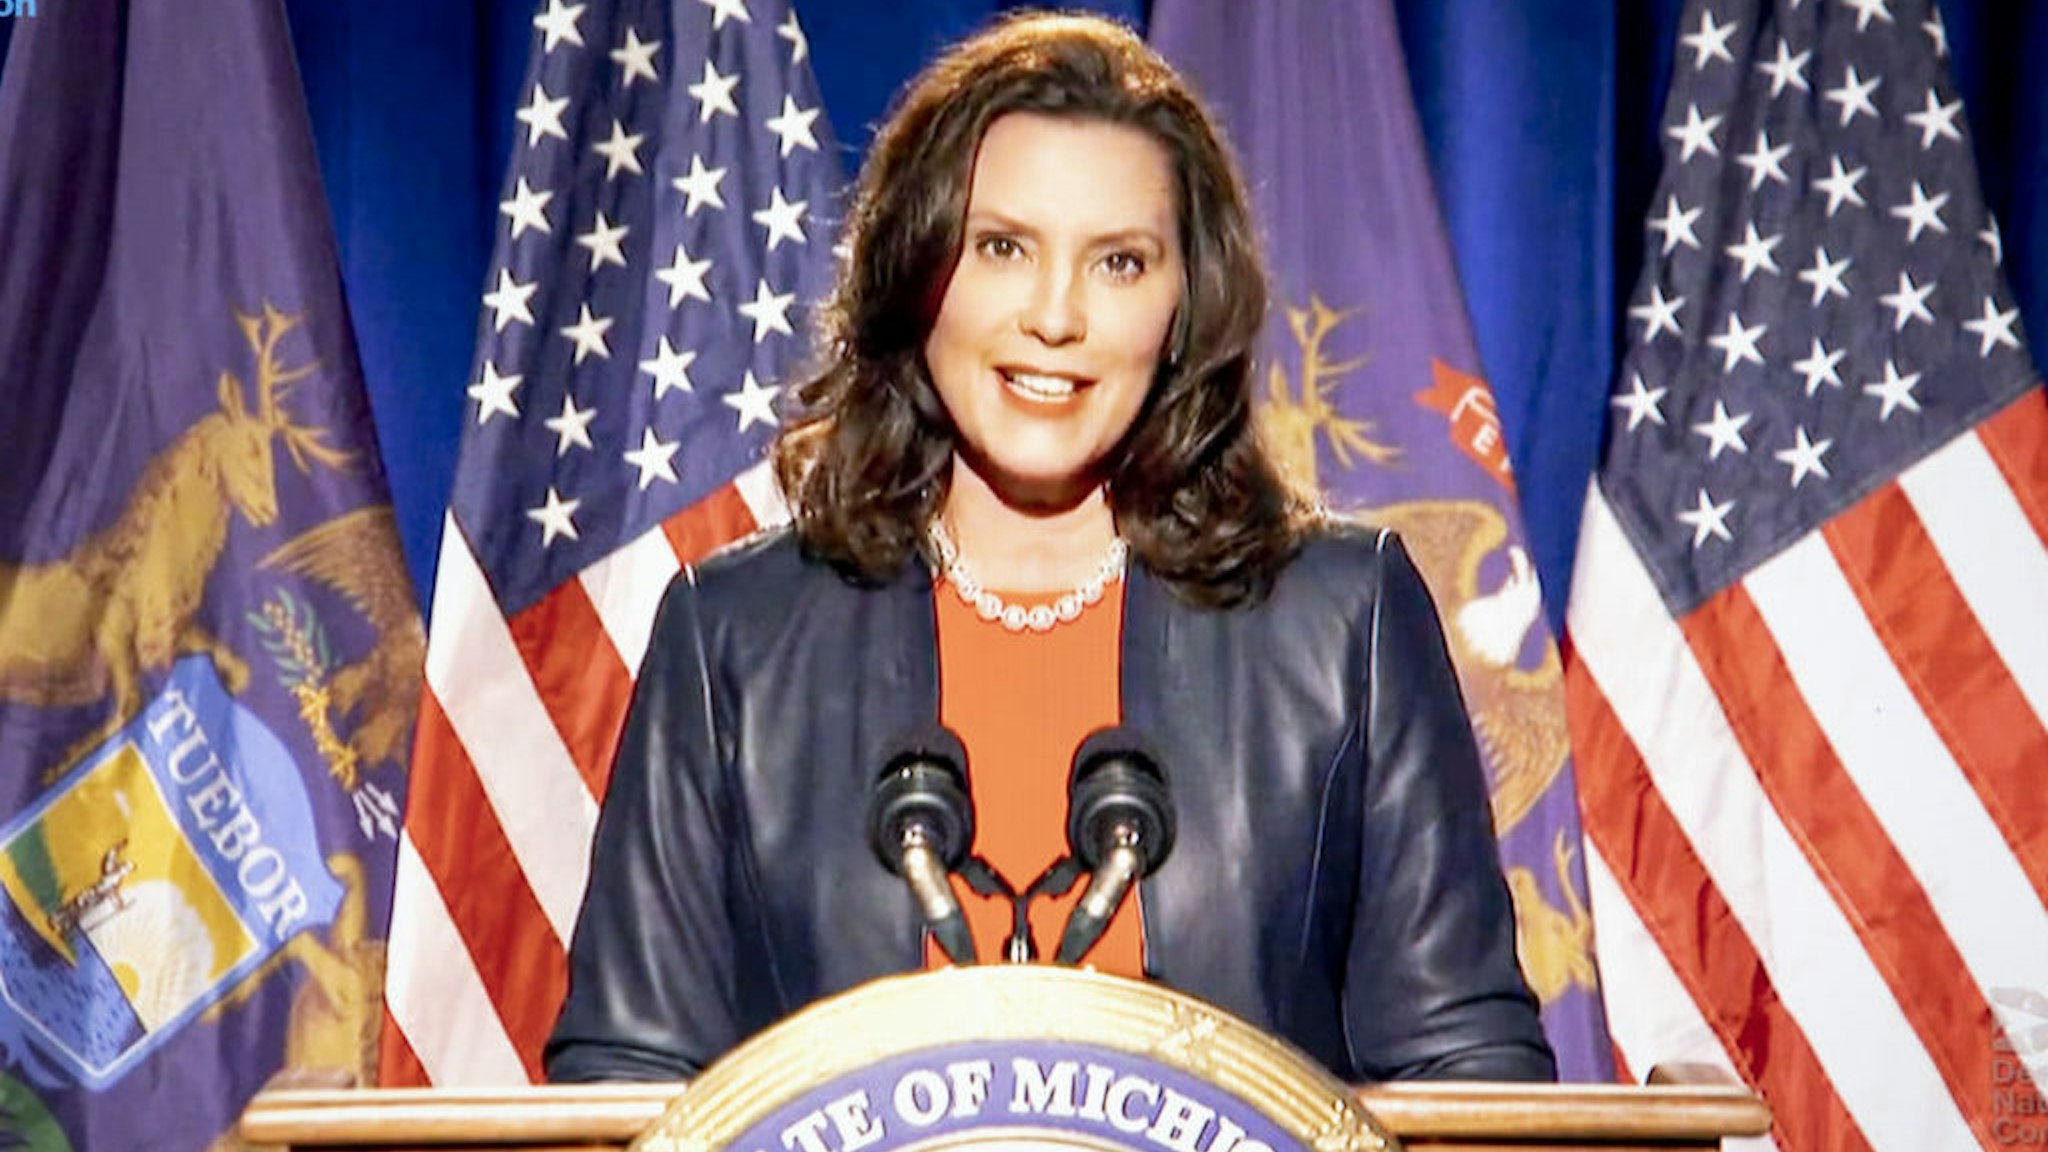 Gretchen Whitmer, governor of Michigan, speaks during the virtual Democratic National Convention seen on a laptop computer in Tiskilwa, Illinois, U.S., on Monday, Aug. 17, 2020. The DNC, which began Monday and ends Thursday with Joe Biden accepting the nomination for president, will be almost entirely virtual with speakers delivering addresses from around the U.S. that will be streamed on the internet. Photographer: Daniel Acker/Bloomberg